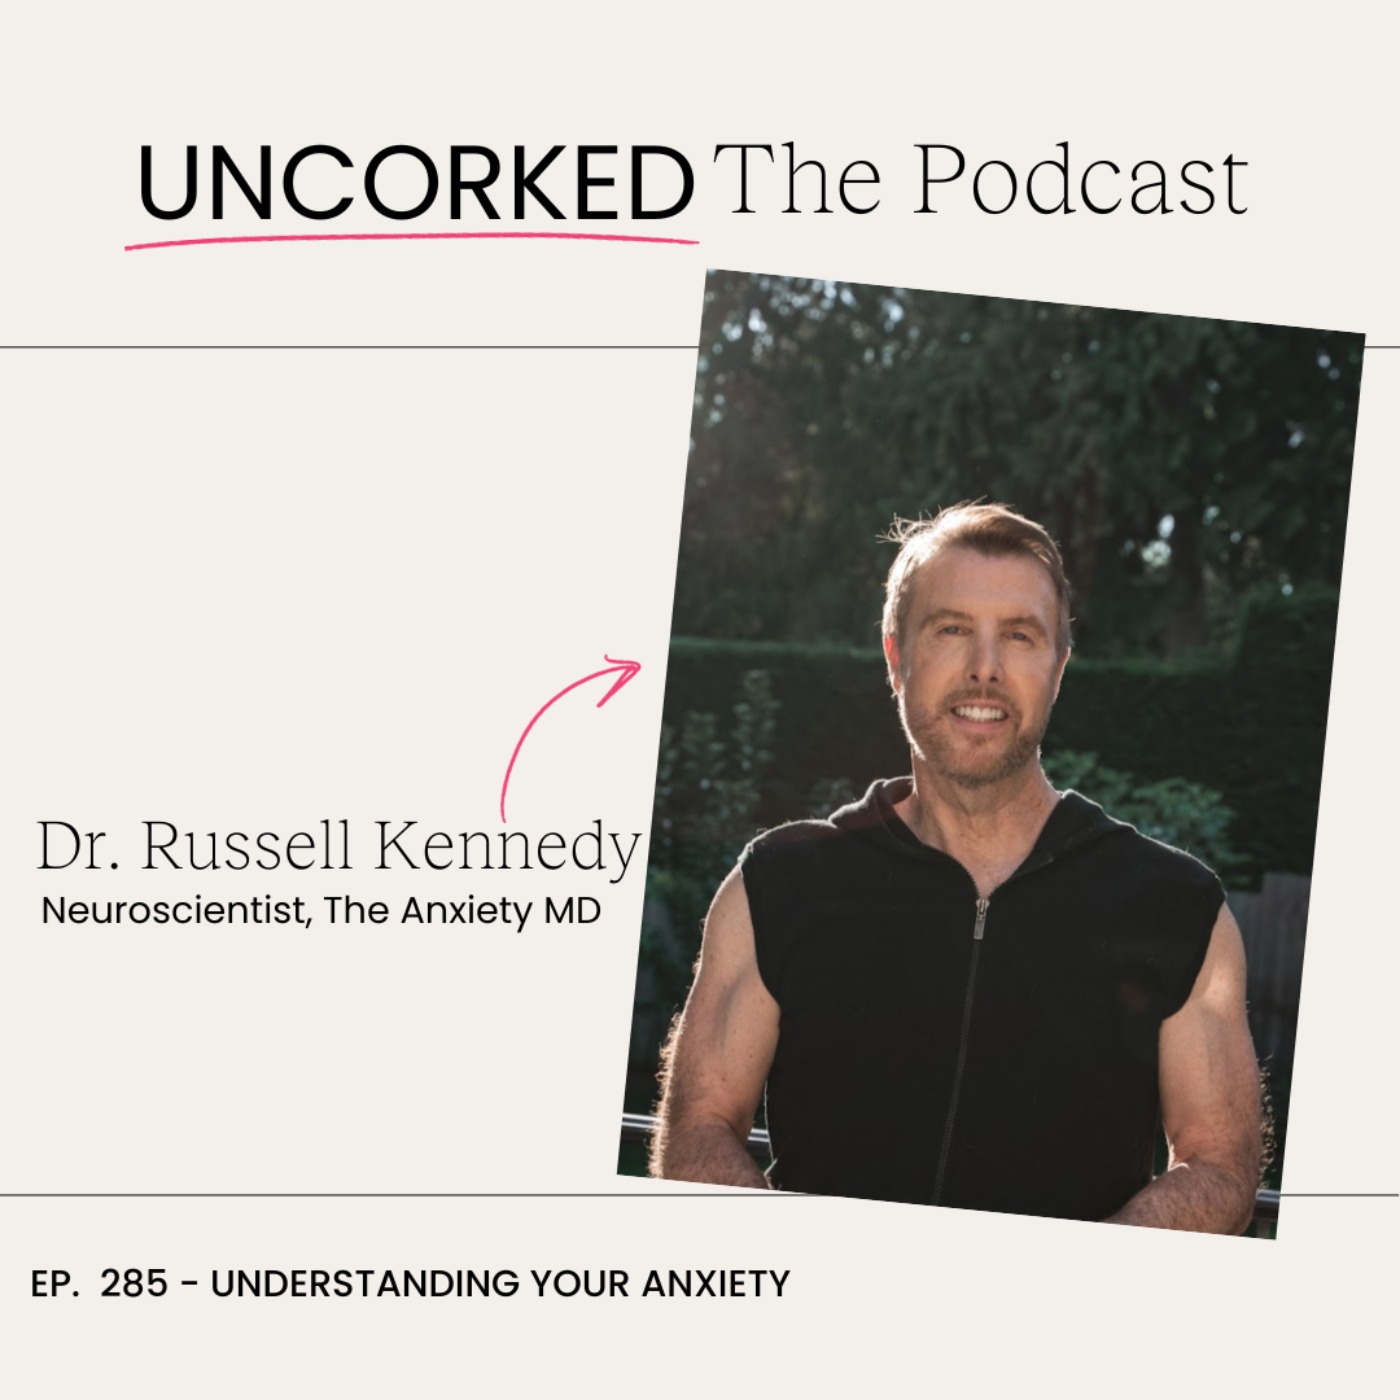 Understanding Your Anxiety with Dr. Russell Kennedy